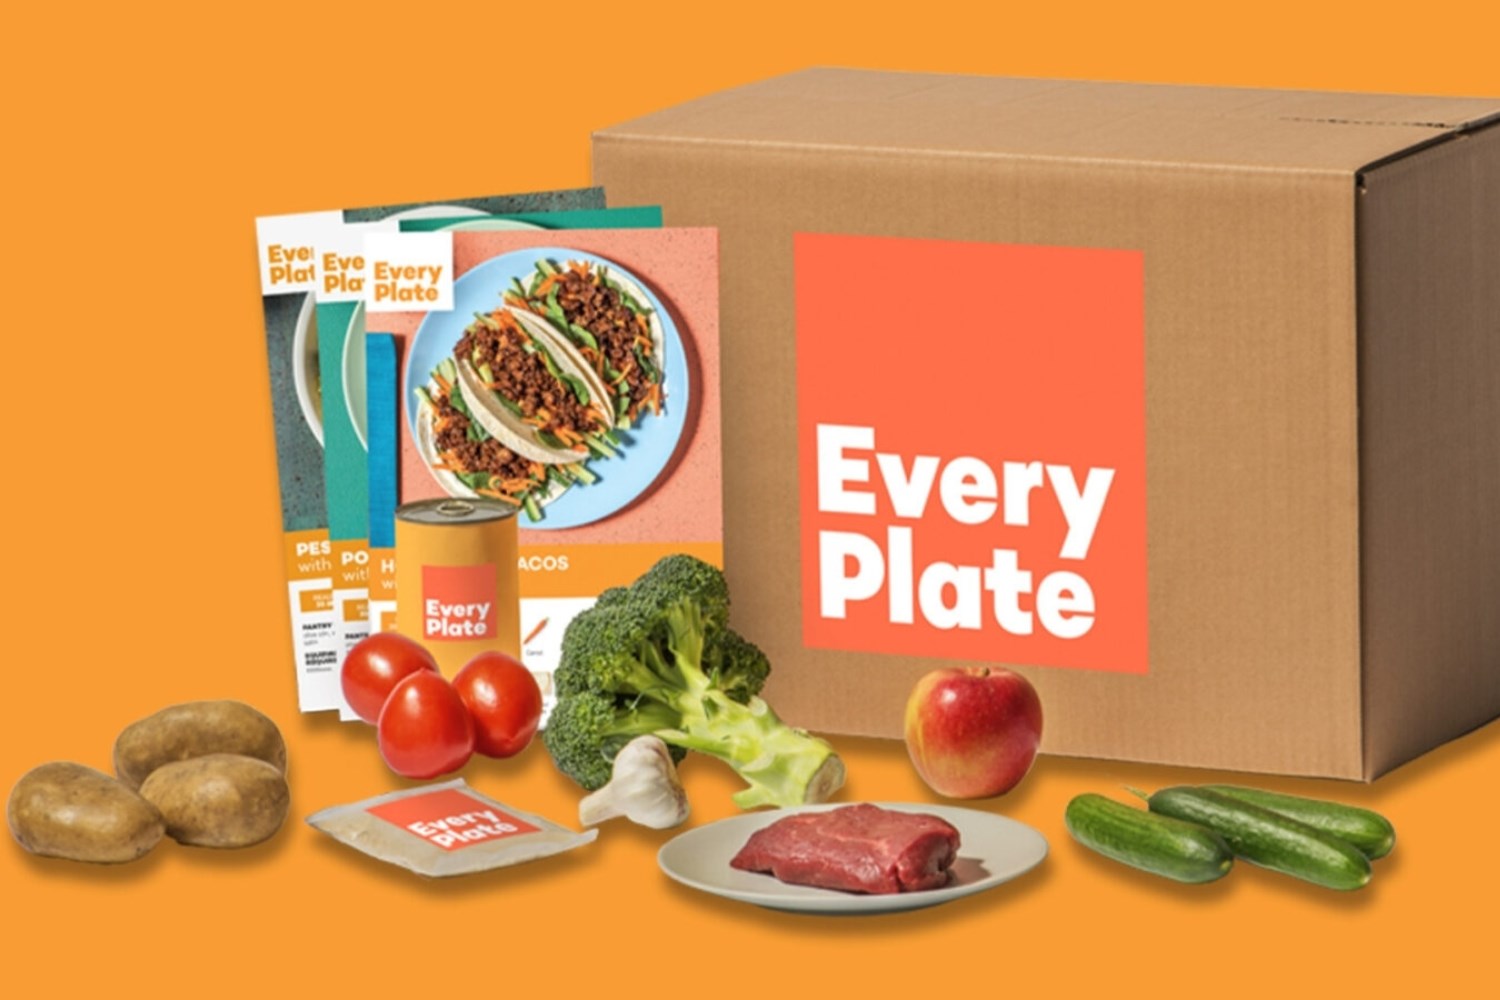 The Best Meal Kits And Food Delivery Boxes In Australia | Better Homes ...